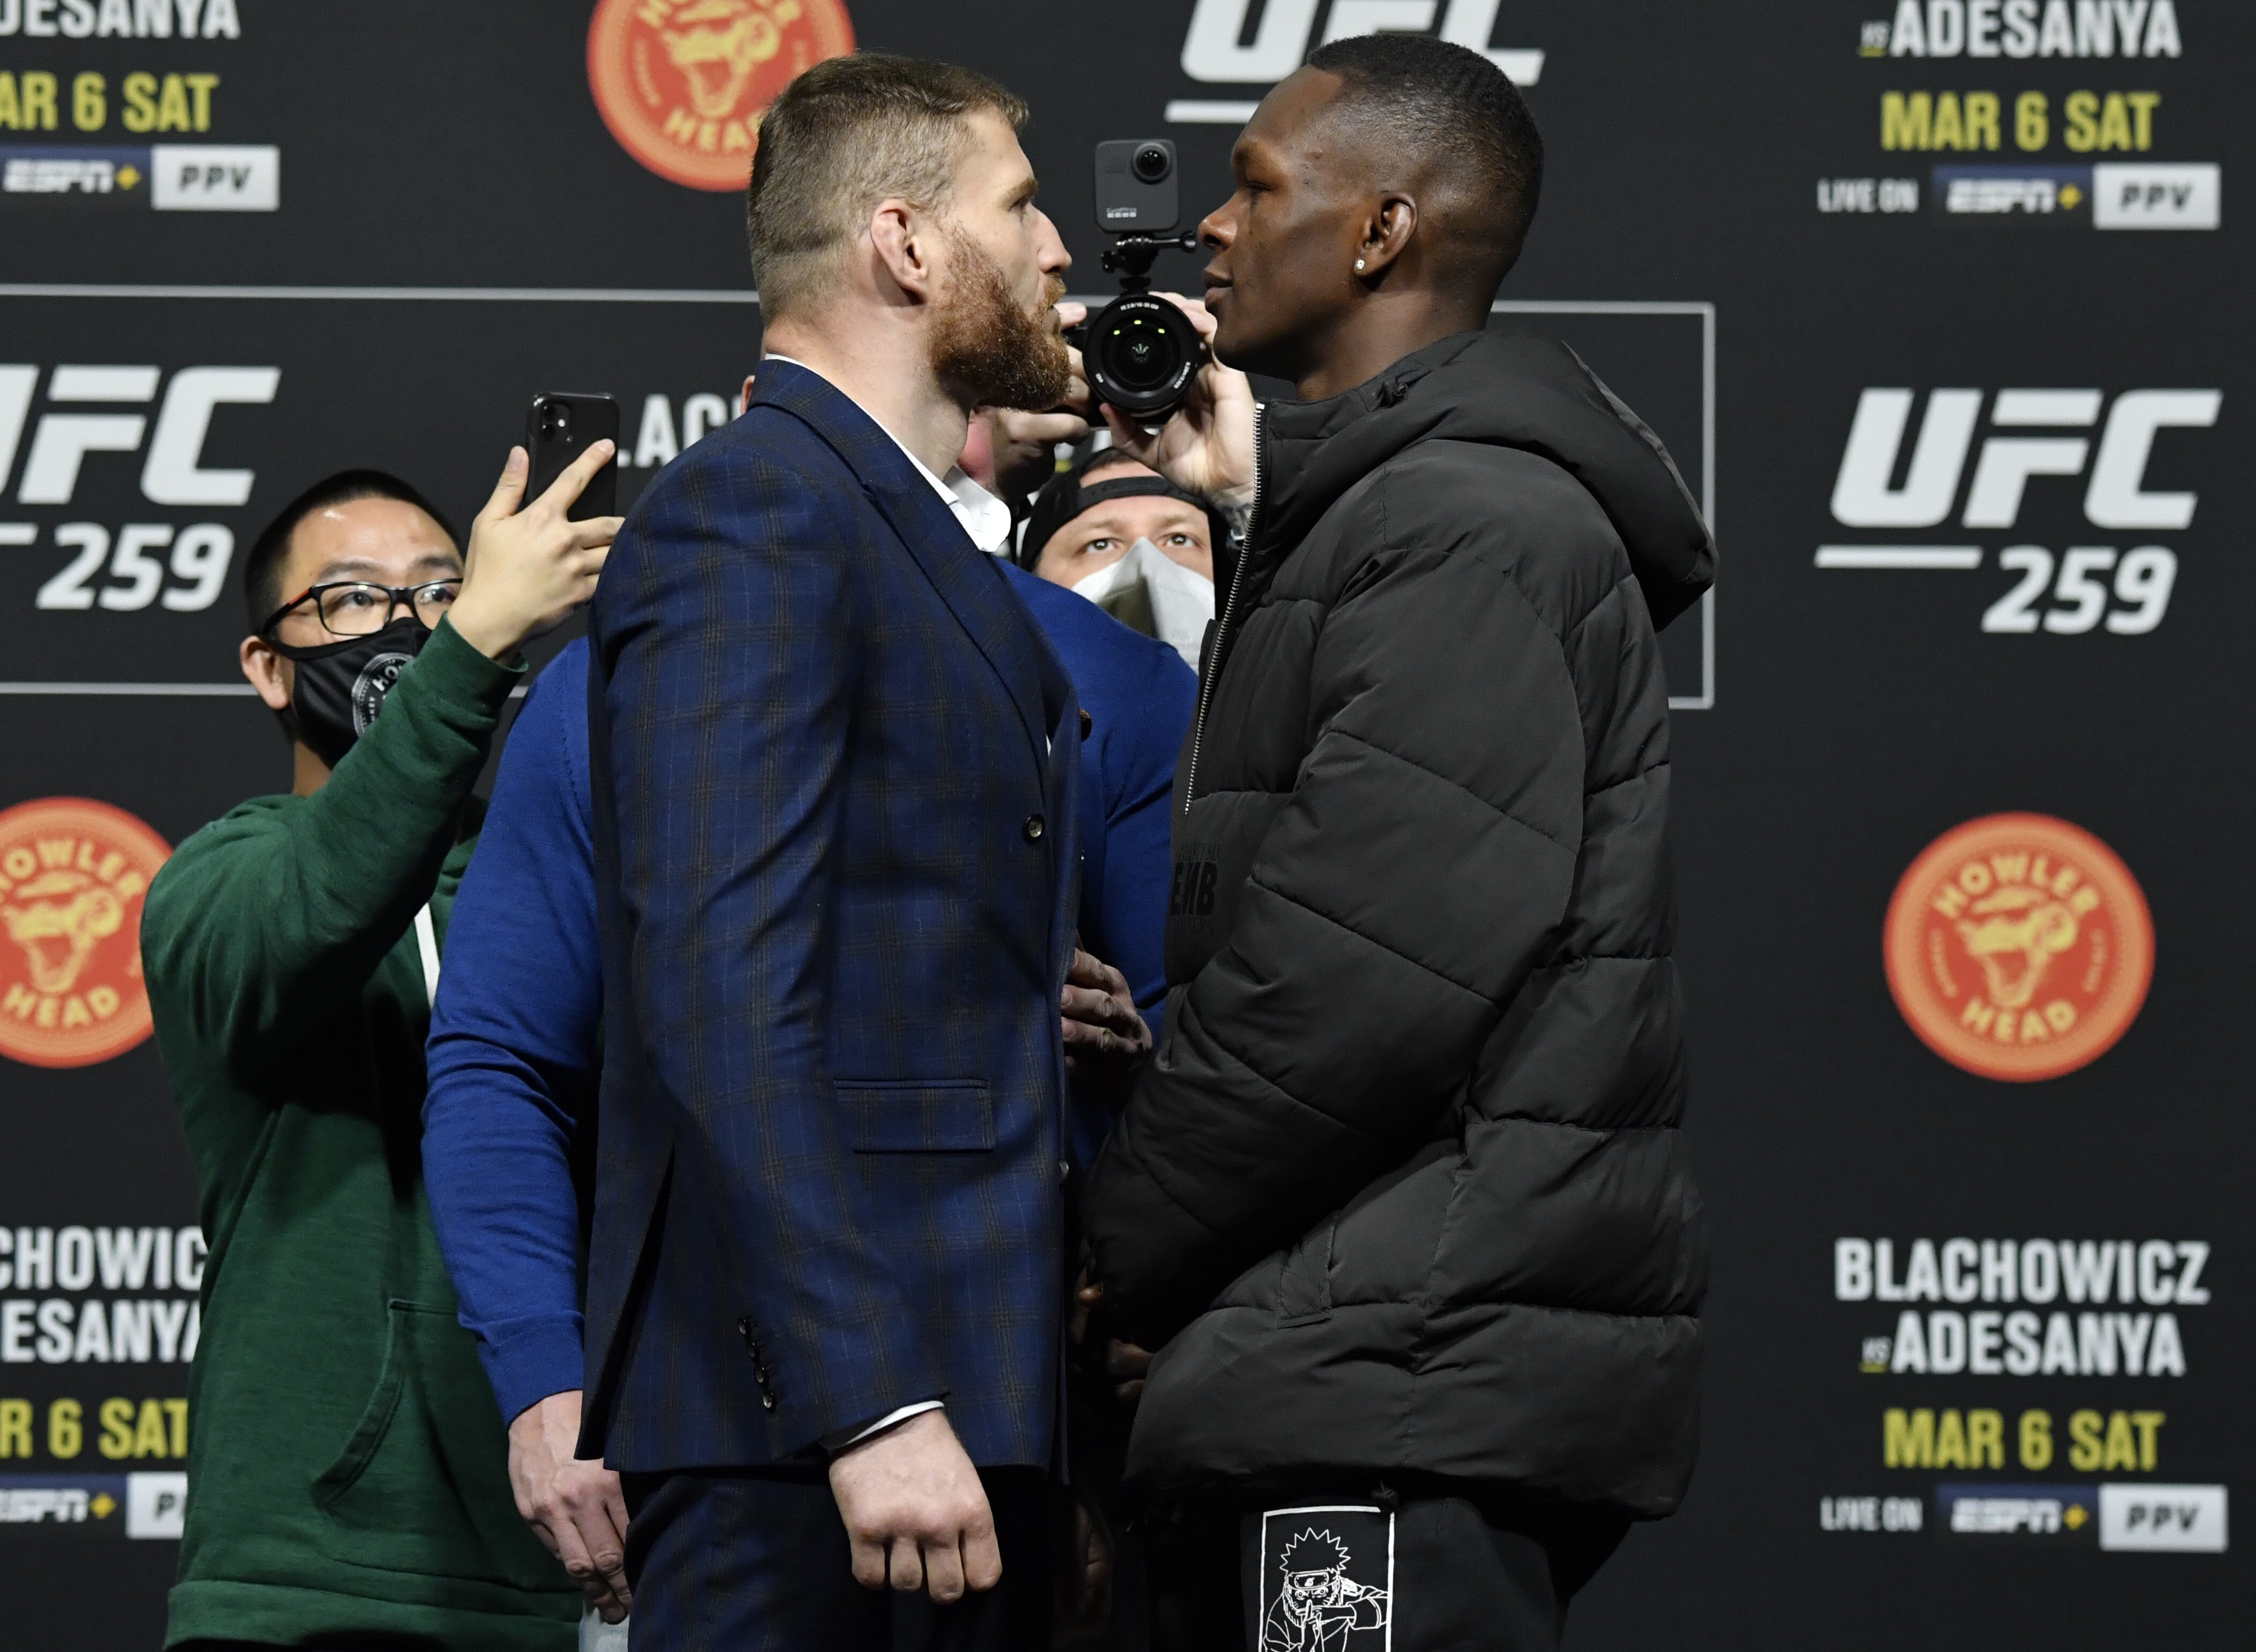 Jan Blachowicz (left) and Israel Adesanya face off during the UFC 259 press conference at UFC Apex on March 4, 2021 in Las Vegas, Nevada. Photo: Jeff Bottari/Zuffa LLC